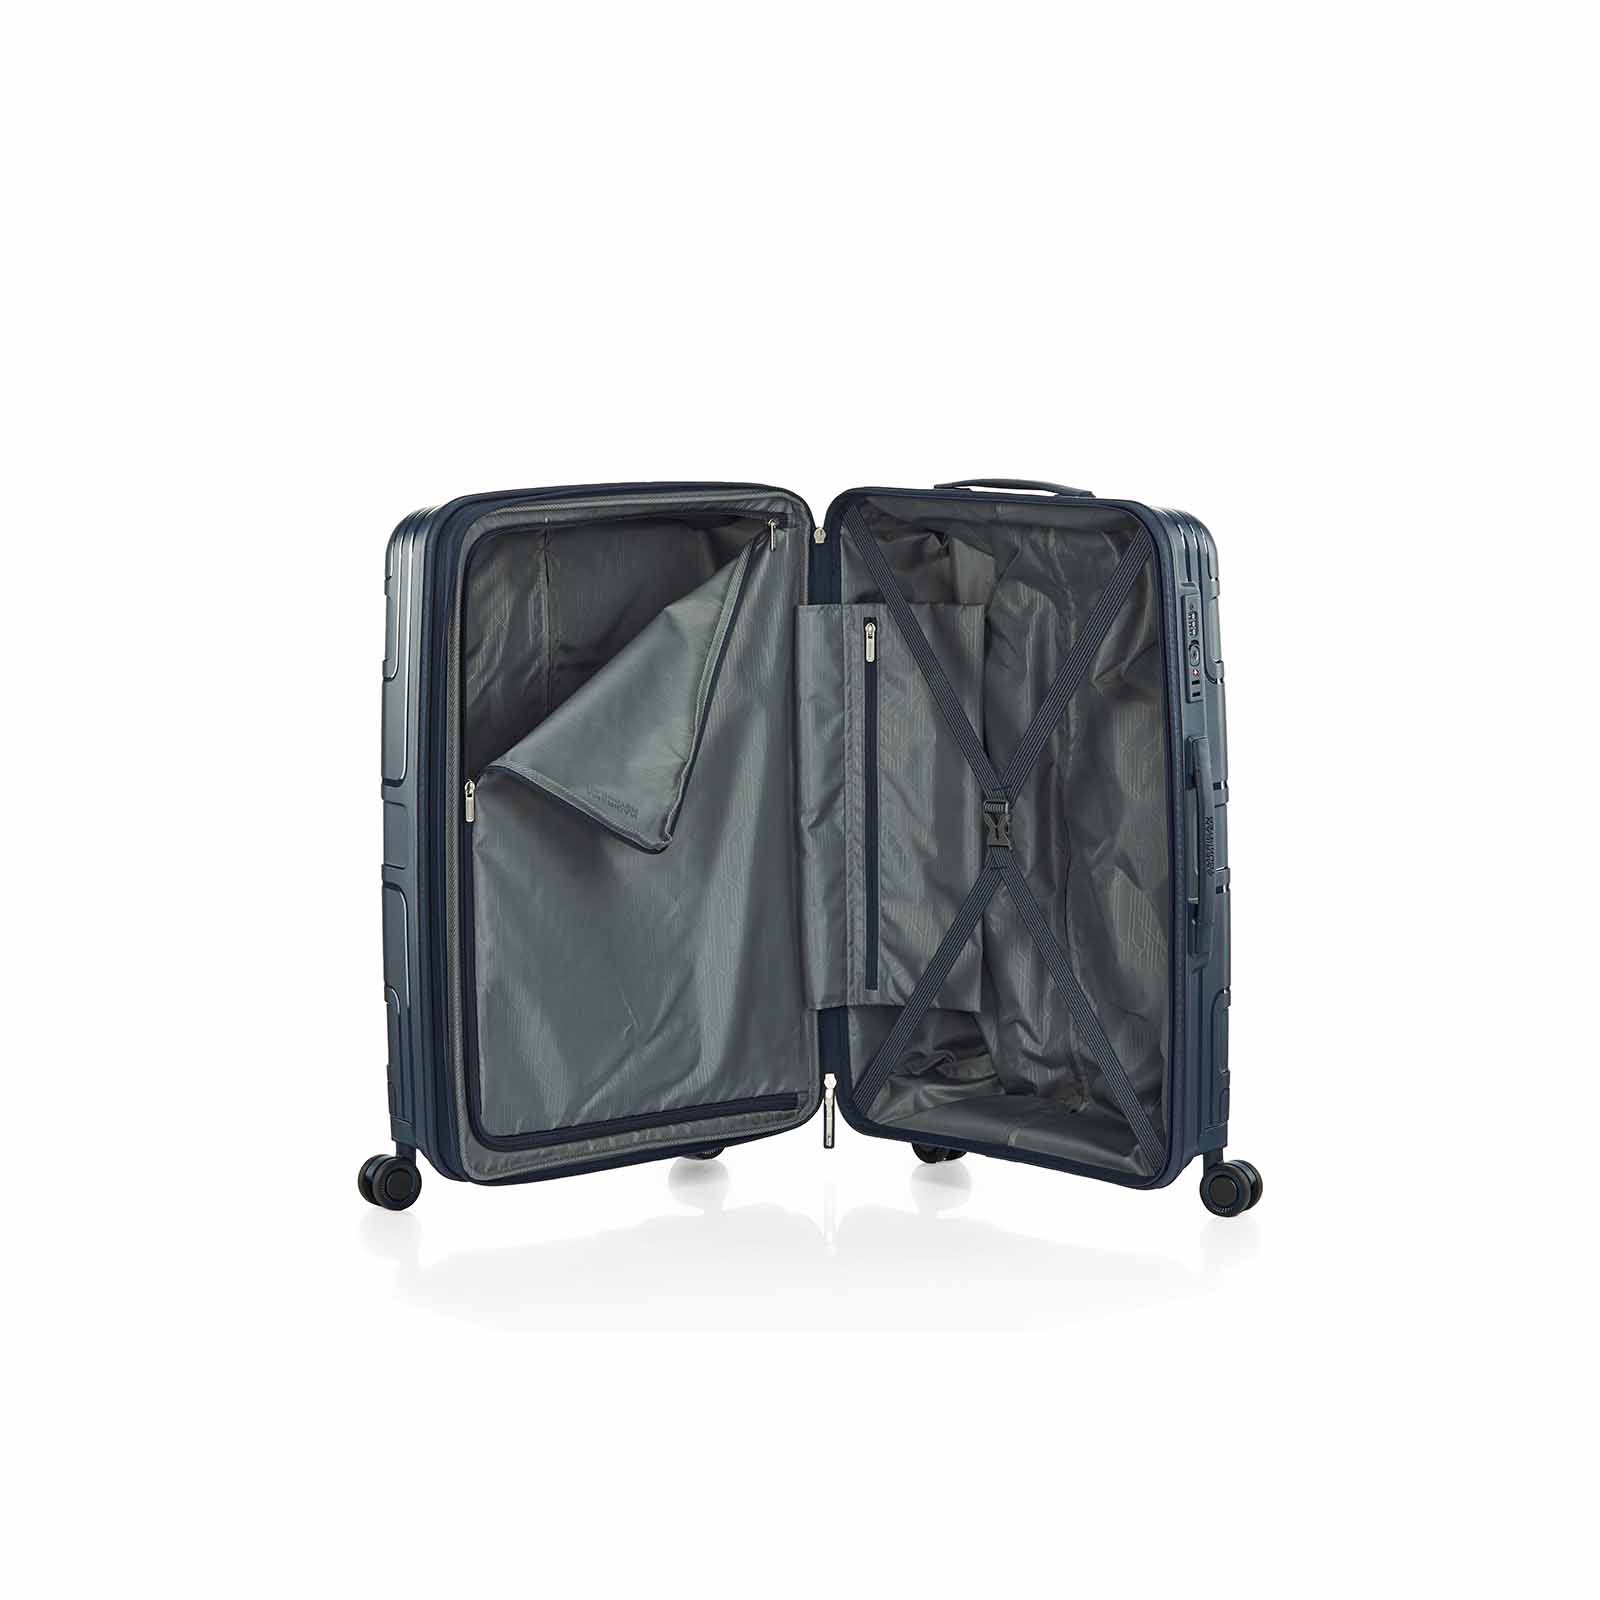 American-Tourister-Light-Max-69cm-Suitcase-Navy-Open